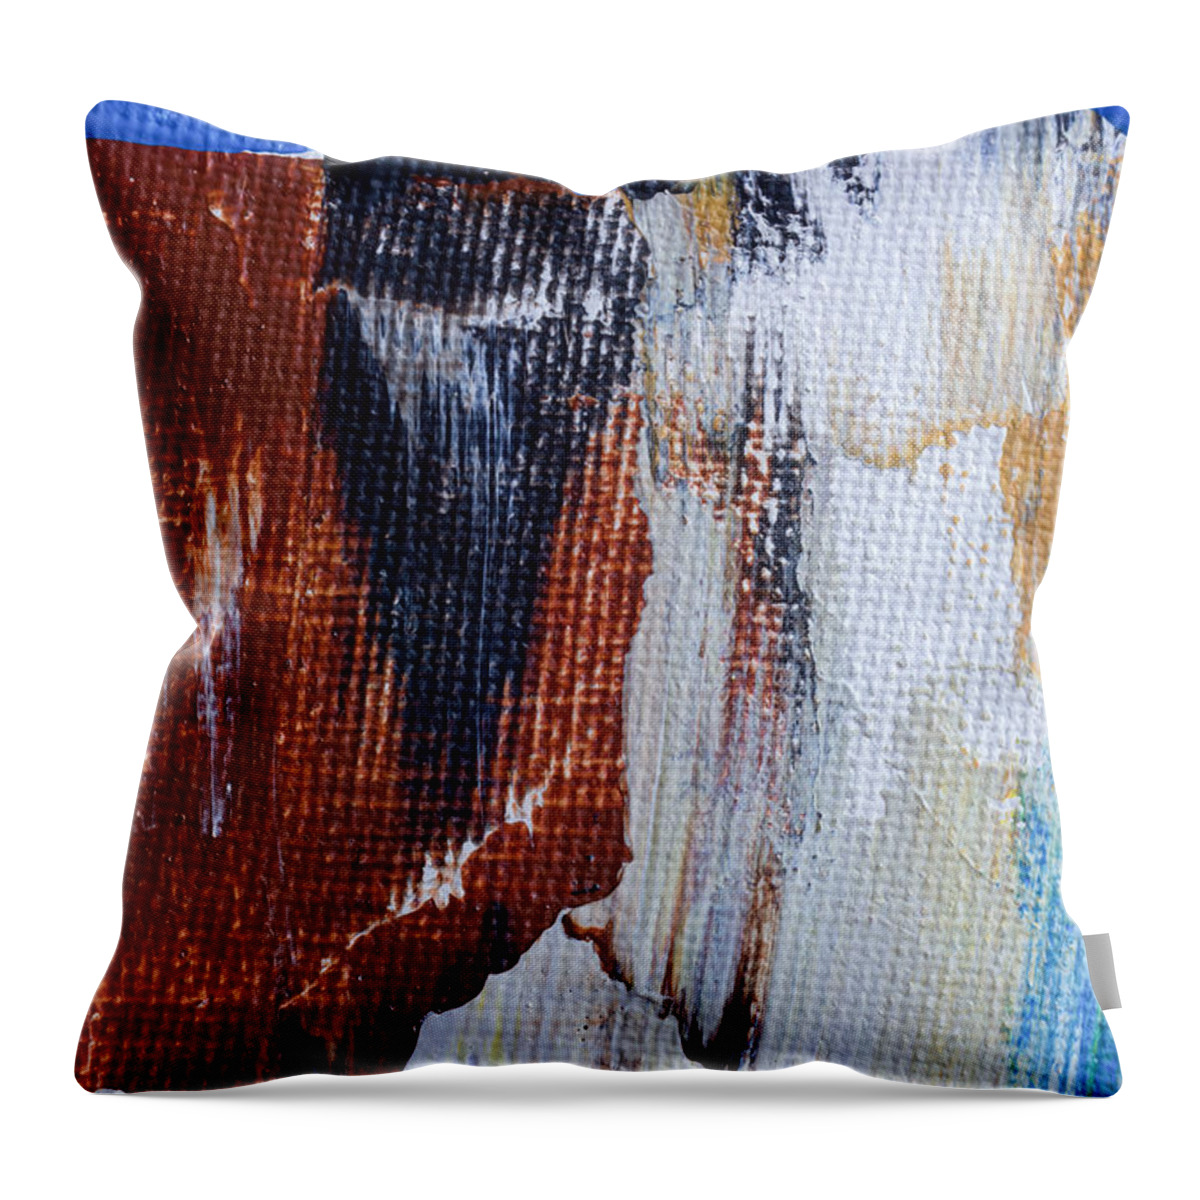 Background Throw Pillow featuring the painting An Abstract Sort Of Weekend by Heidi Smith